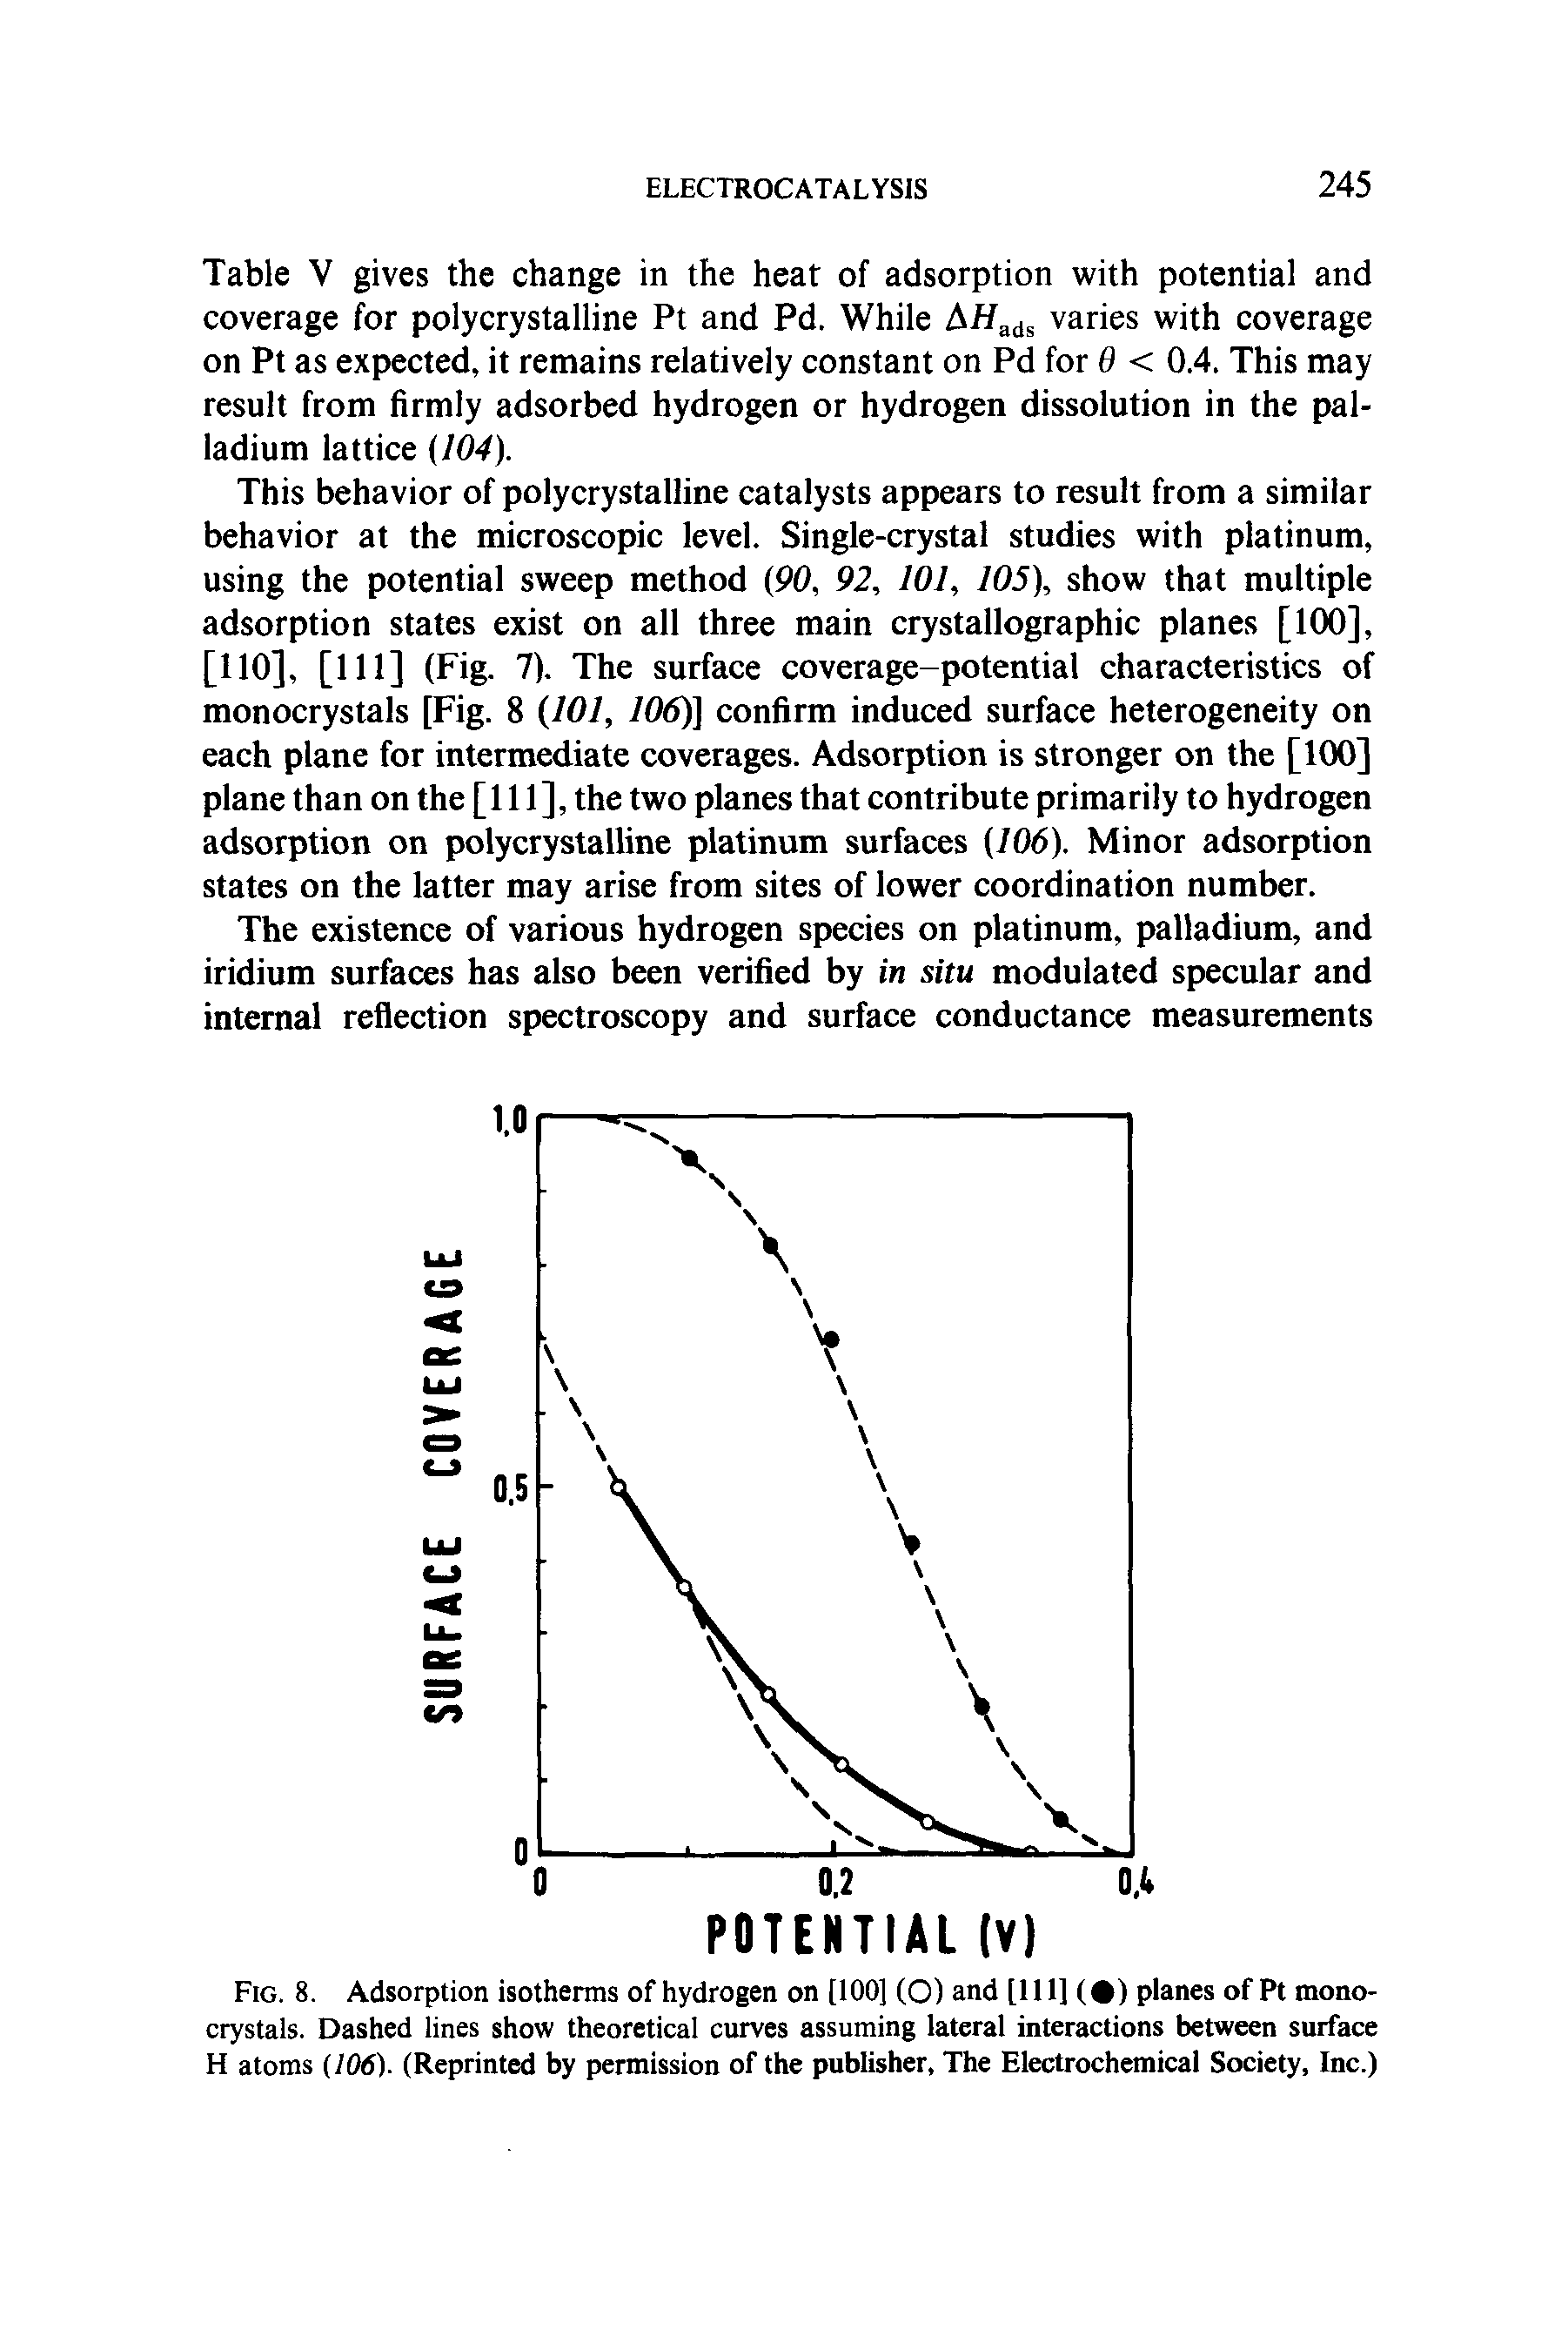 Table V gives the change in the heat of adsorption with potential and coverage for polycrystalline Pt and Pd. While AHa varies with coverage on Pt as expected, it remains relatively constant on Pd for d < 0.4. This may result from firmly adsorbed hydrogen or hydrogen dissolution in the palladium lattice (104).